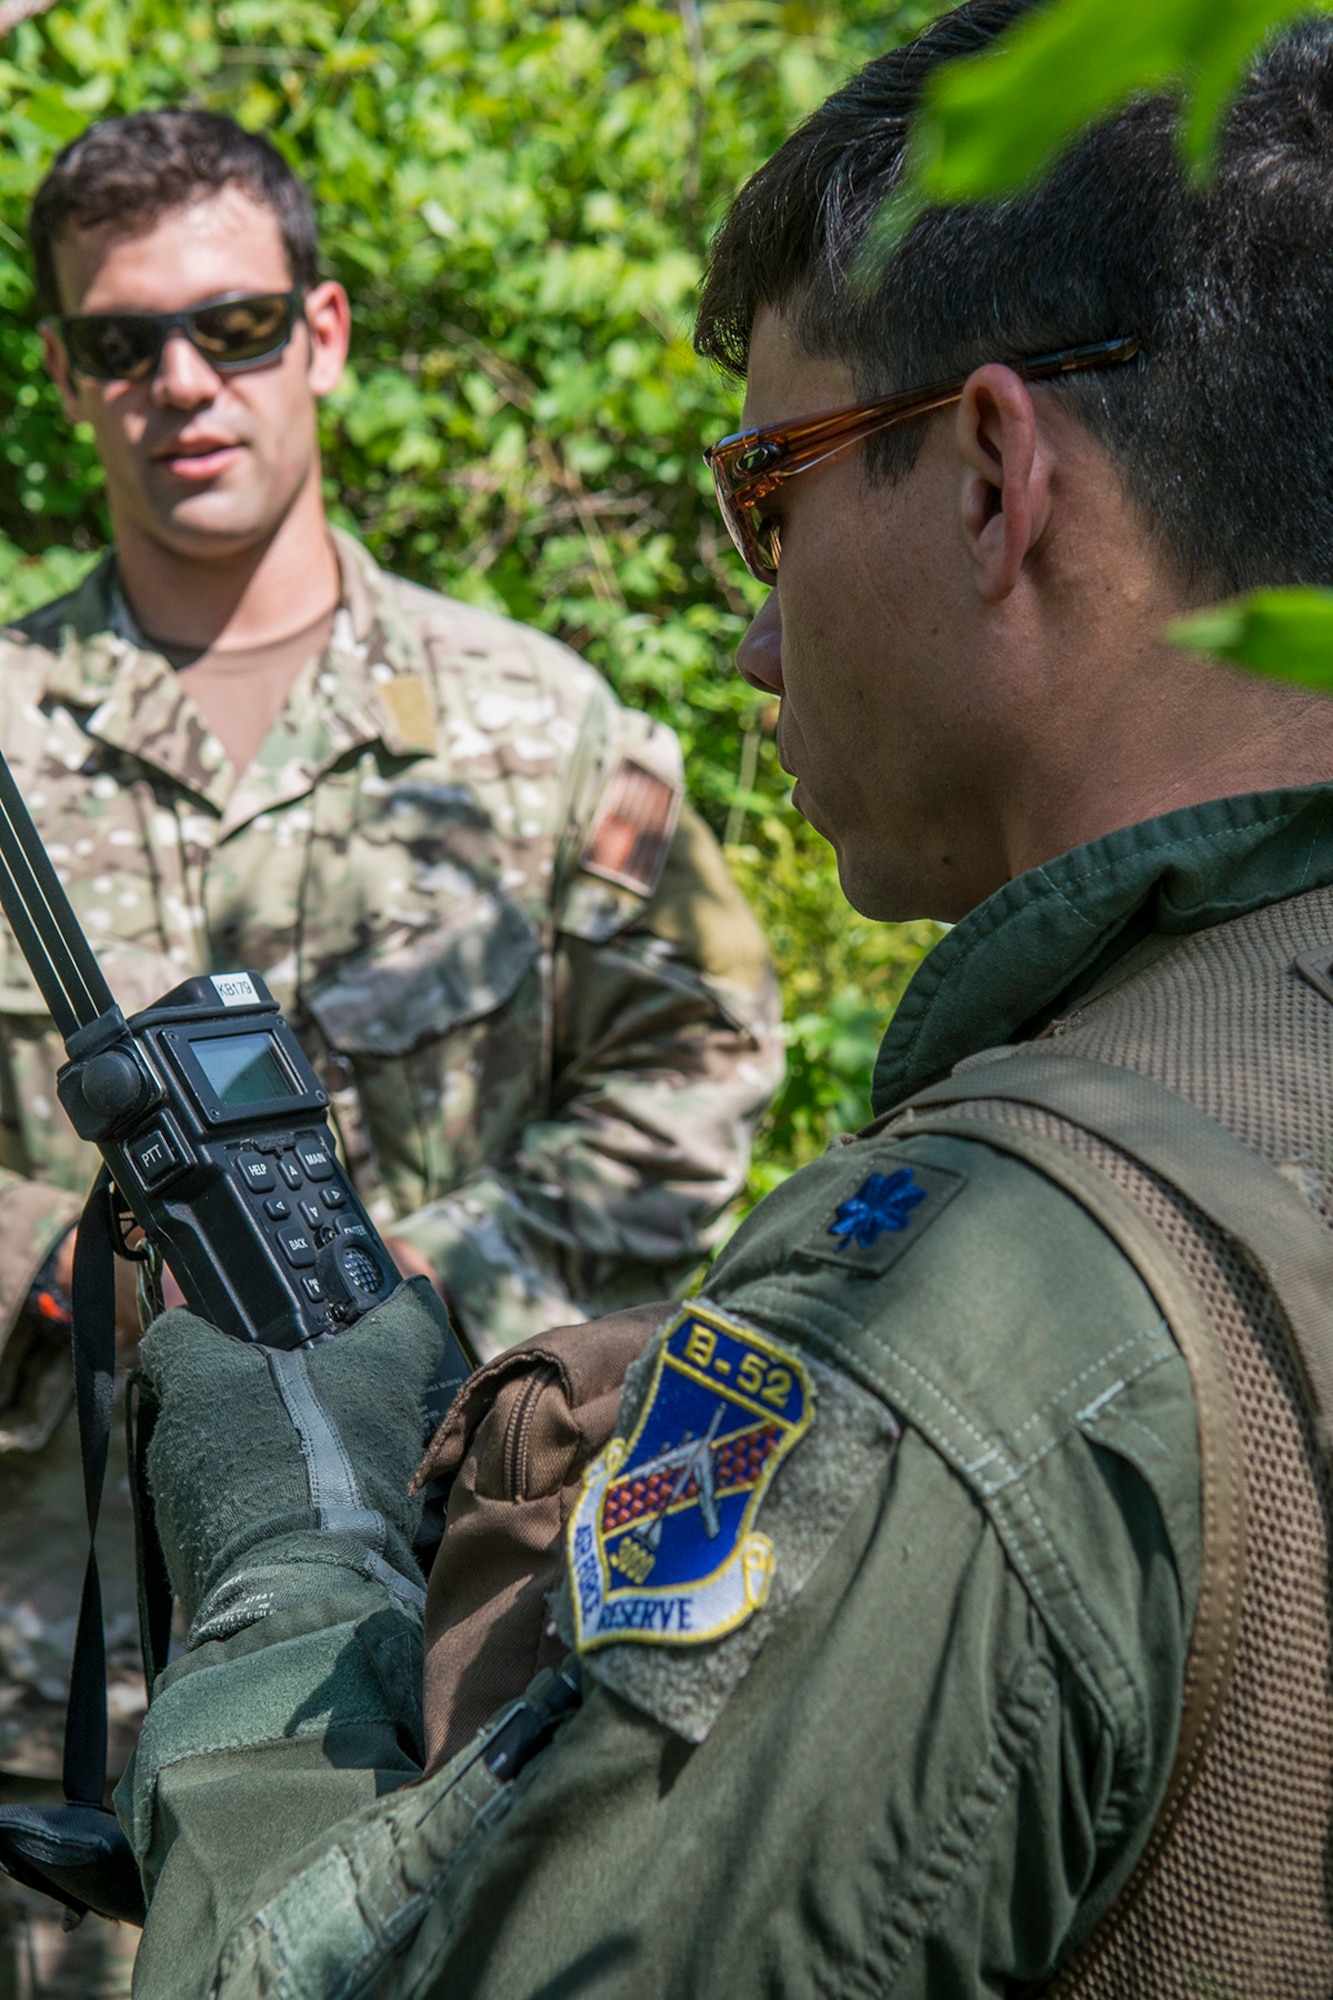 U.S. Air Force Lt. Col. Christopher Chandler receives instruction on how to use a satellite radio during Survival, Evasion, Resistance and Escape (SERE) training on May 14, 2015, Claiborne Gunnery and Bombing Range, La. SERE training gives aircrew the knowledge and tools necessary to survive on their own in any environment and under any condition should they have to abandon their aircraft. (U.S. Air Force photo by Master Sgt. Greg Steele/Released)